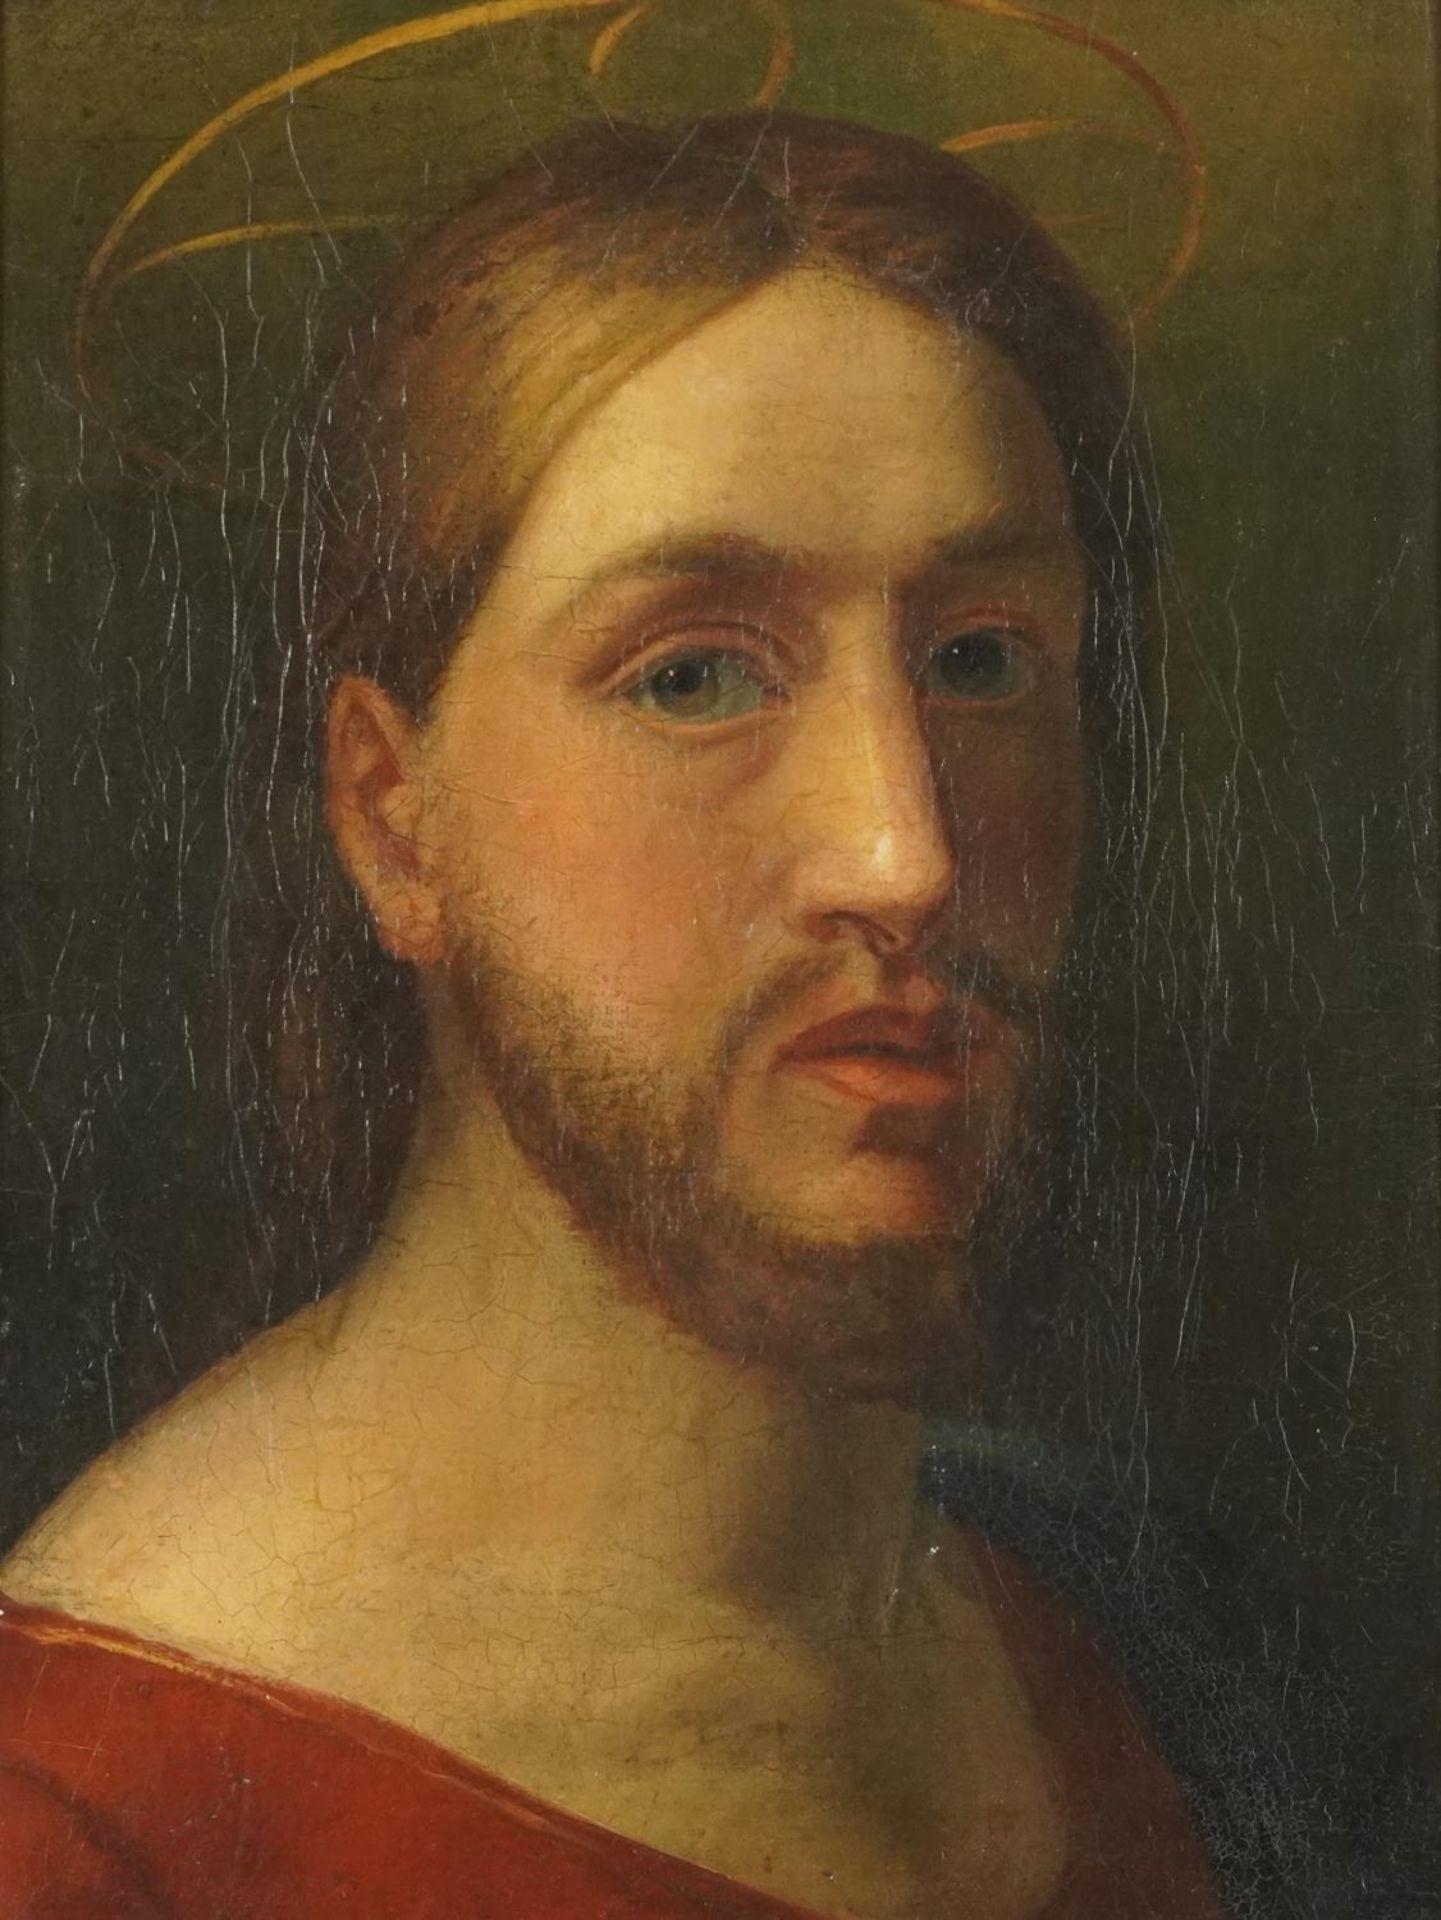 Portrait of Christ, antique Old Master oil on canvas, mounted, unframed, 38.5cm x 29cm excluding the